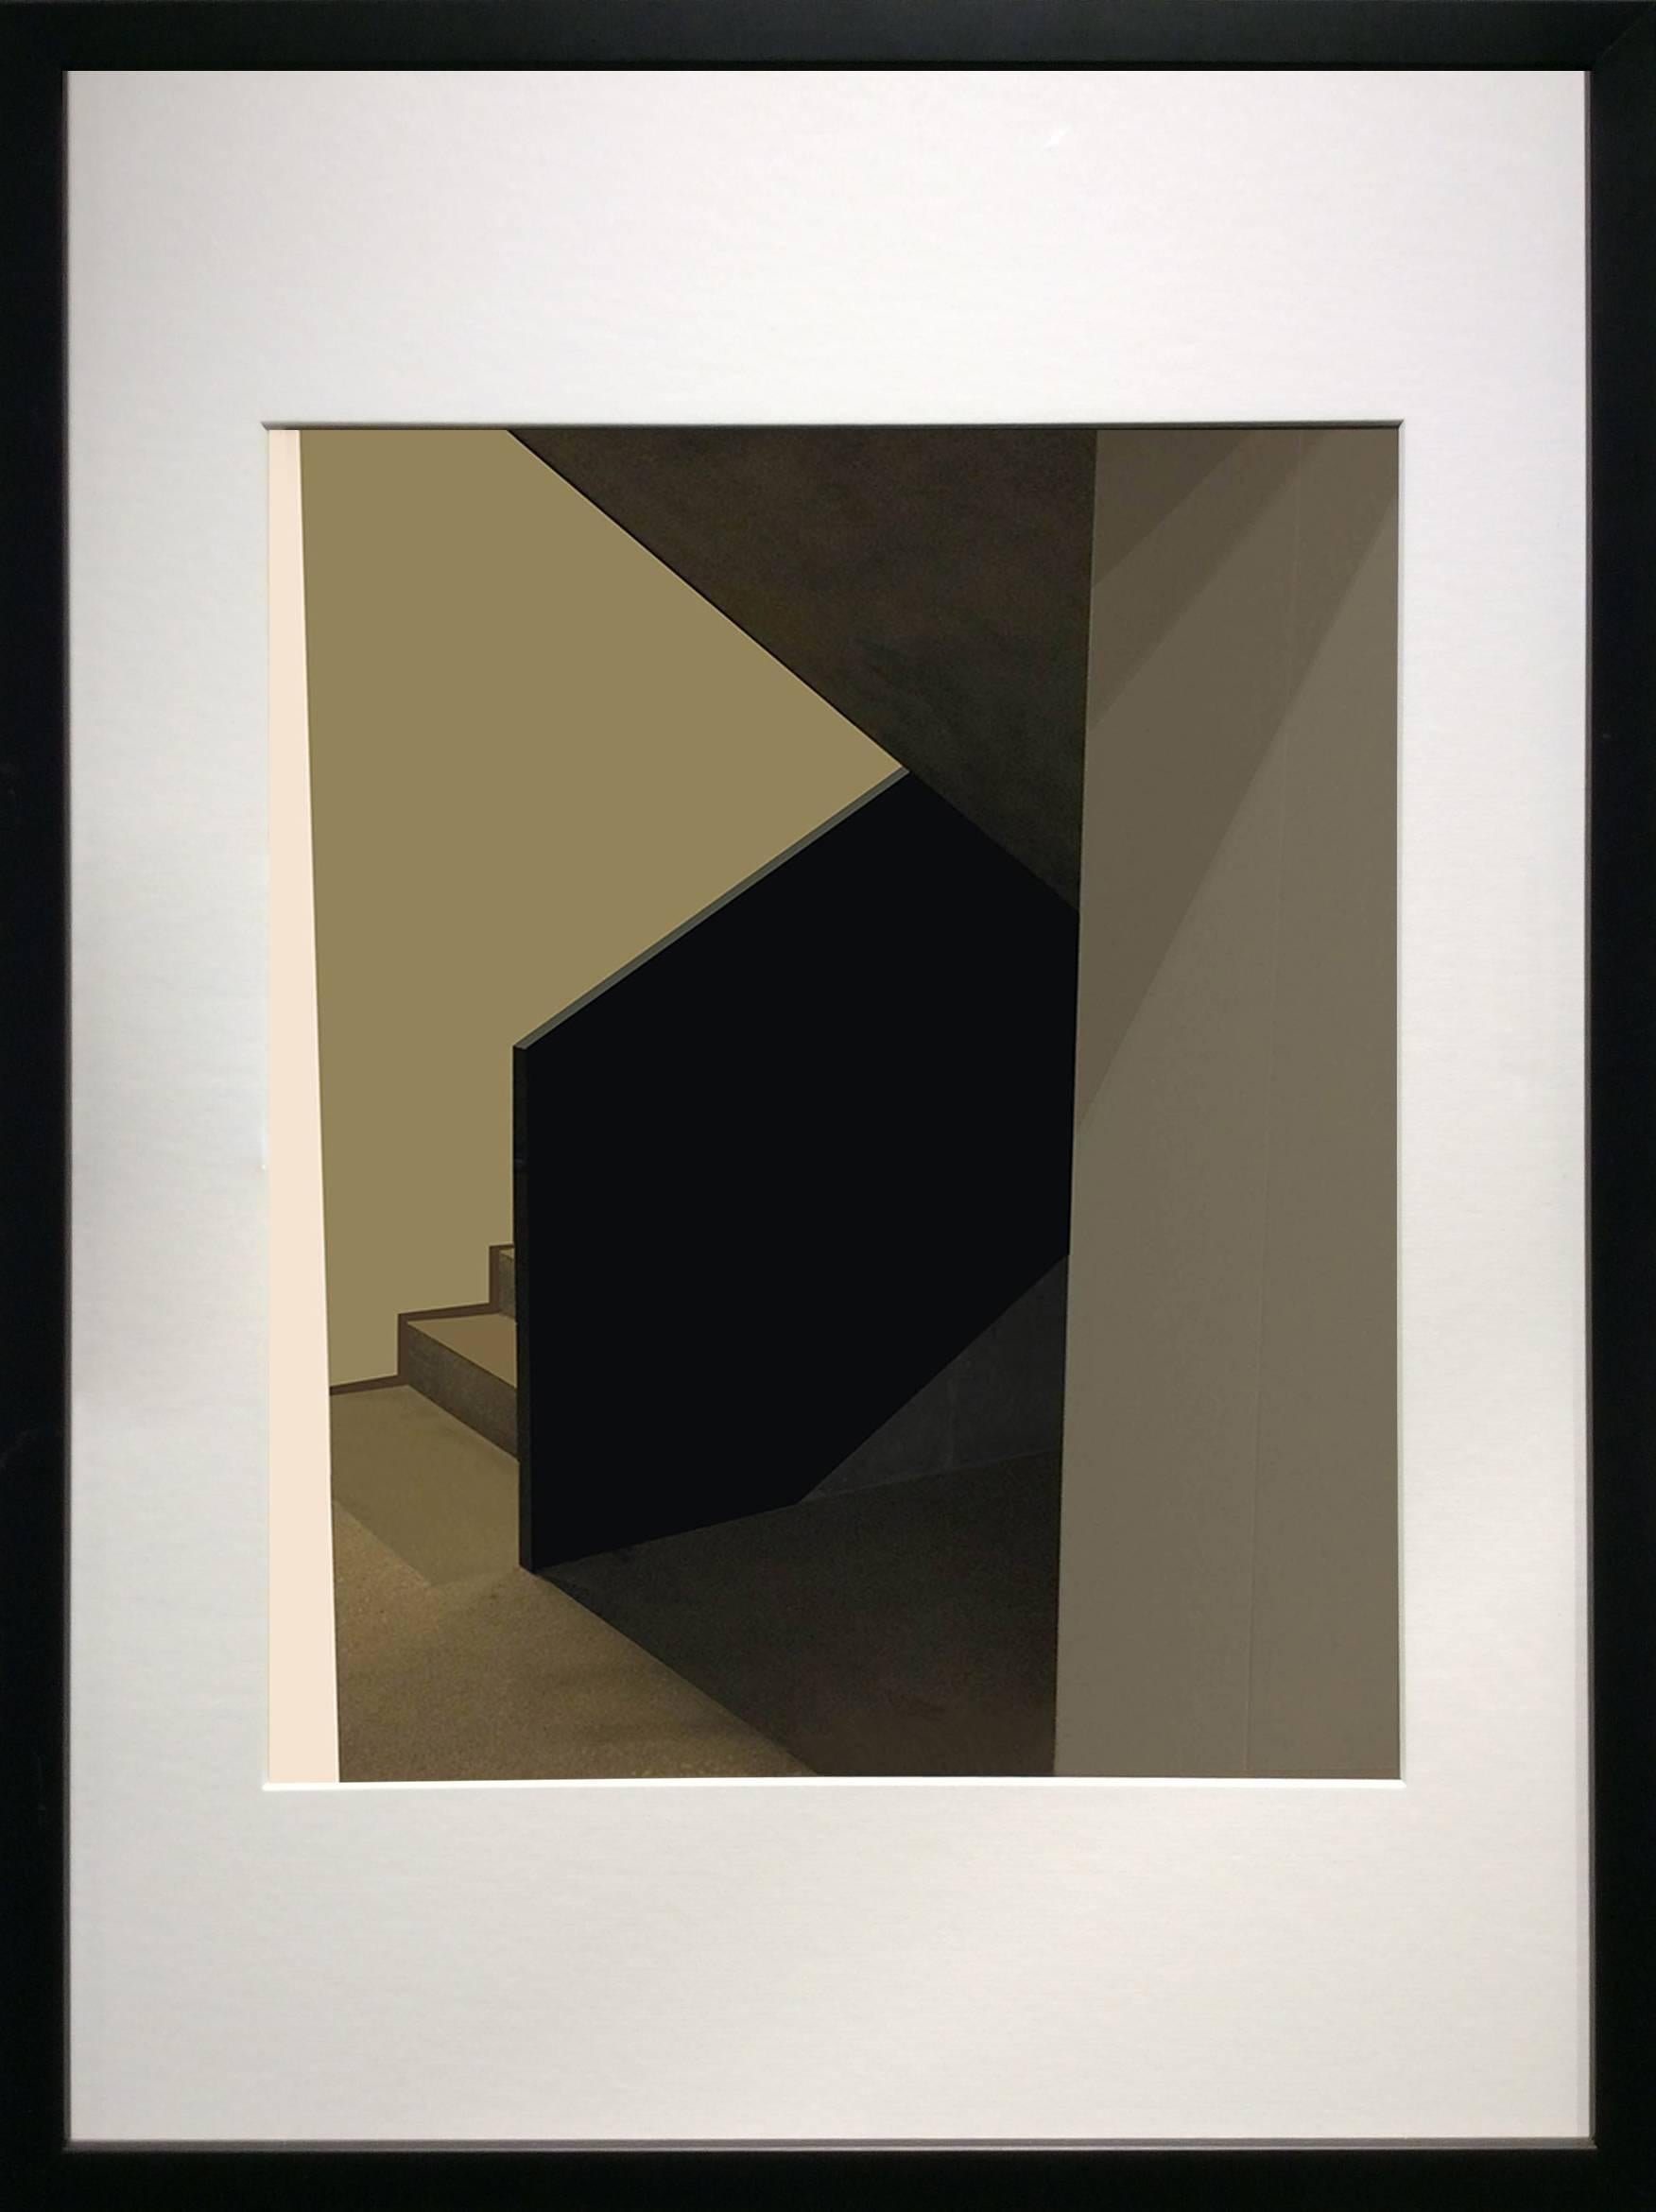 Green Stairs: Modern Abstract Inkjet Print of Minimalist Interior in Black Frame - Photograph by Stephanie Blumenthal